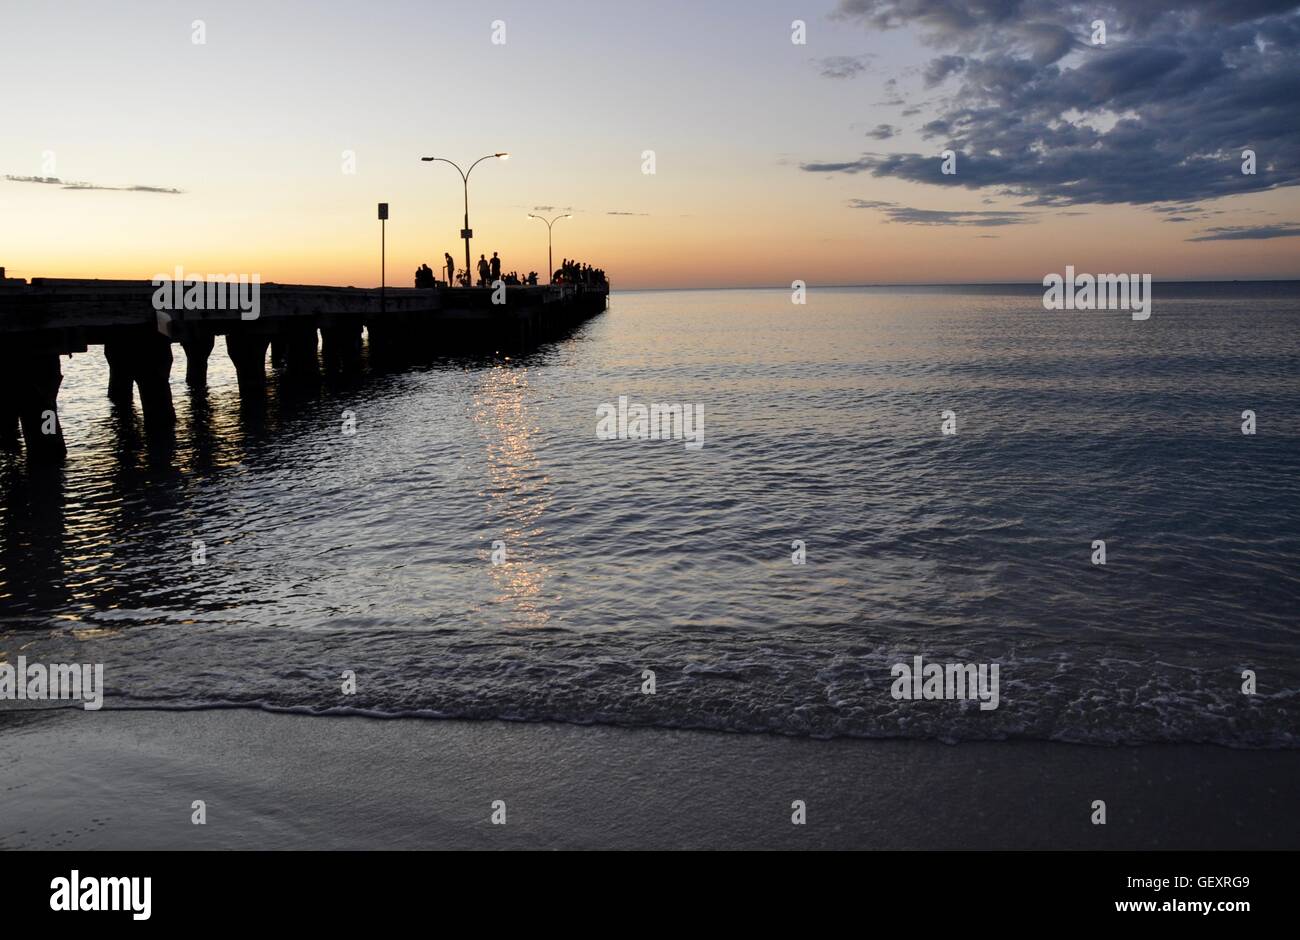 Coogee,WA,Australia-October 25,2015:Indian Ocean jetty with people in silhouette and the colourful sunset at Coogee Beach in Coogee, Western Australia Stock Photo